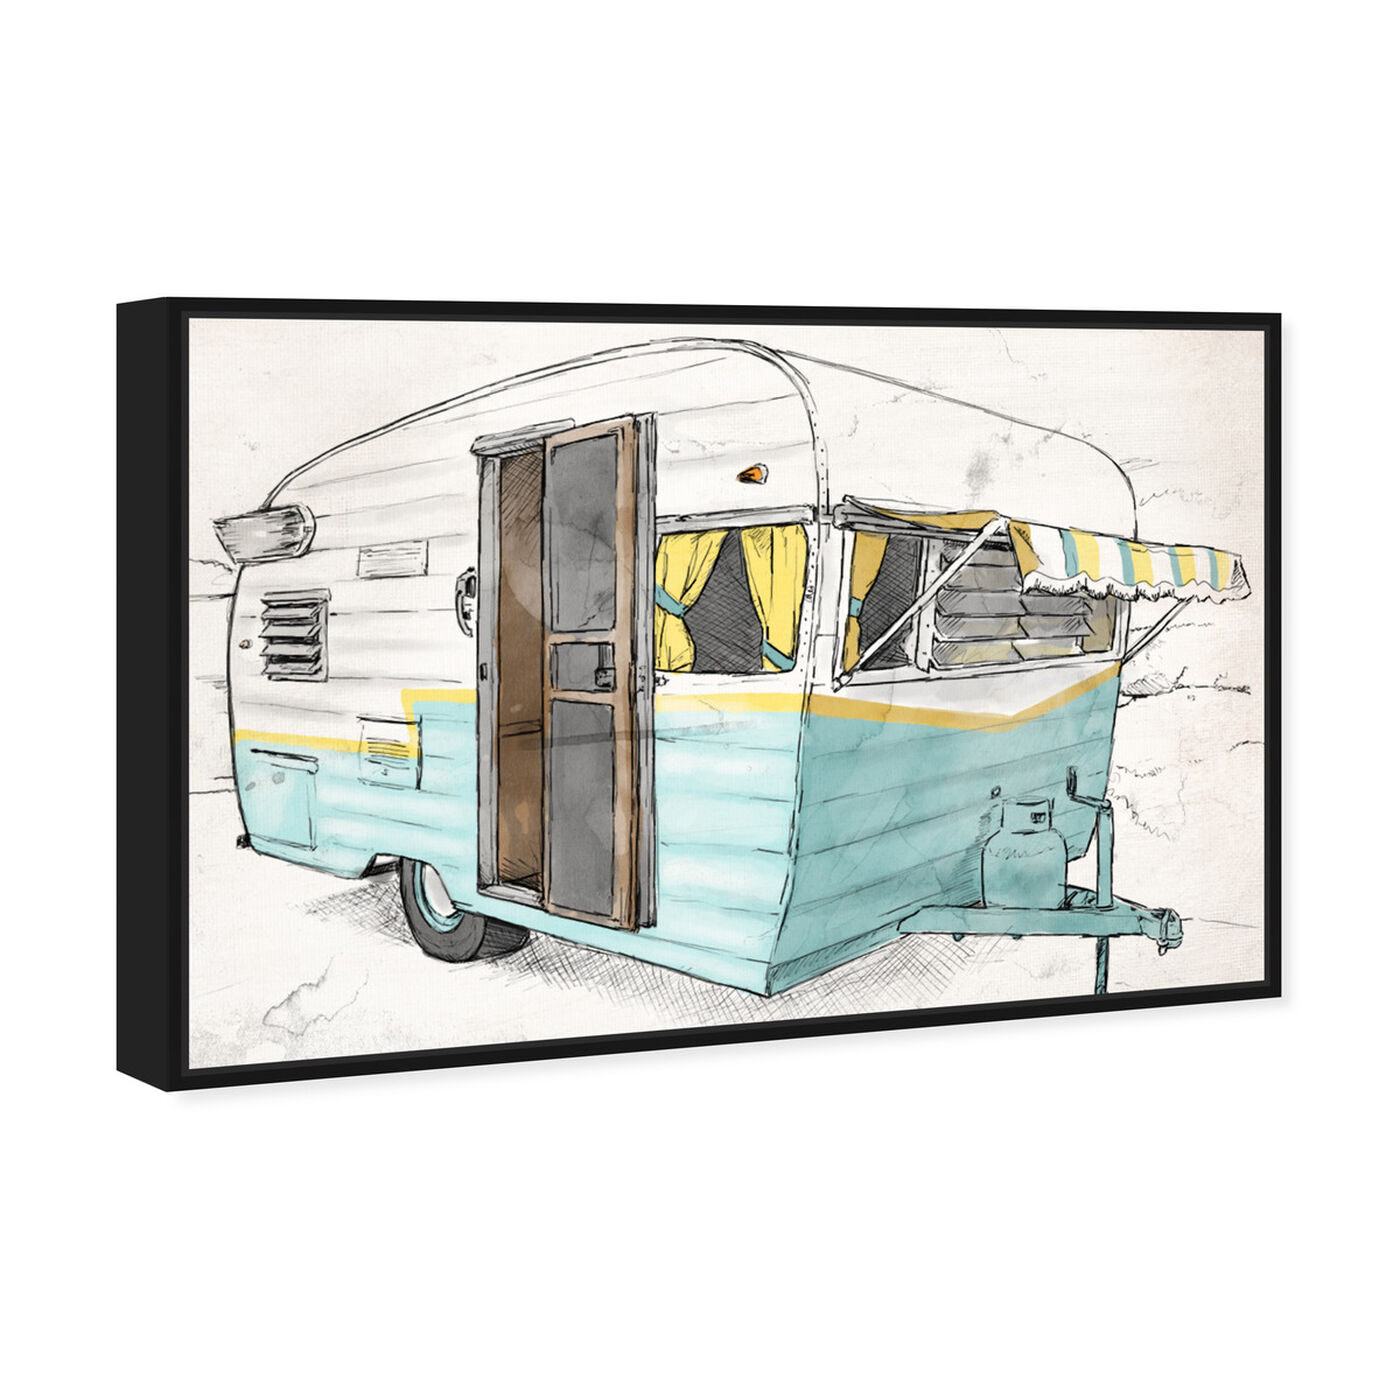 Angled view of Turquoise Camper featuring entertainment and hobbies and camping art.